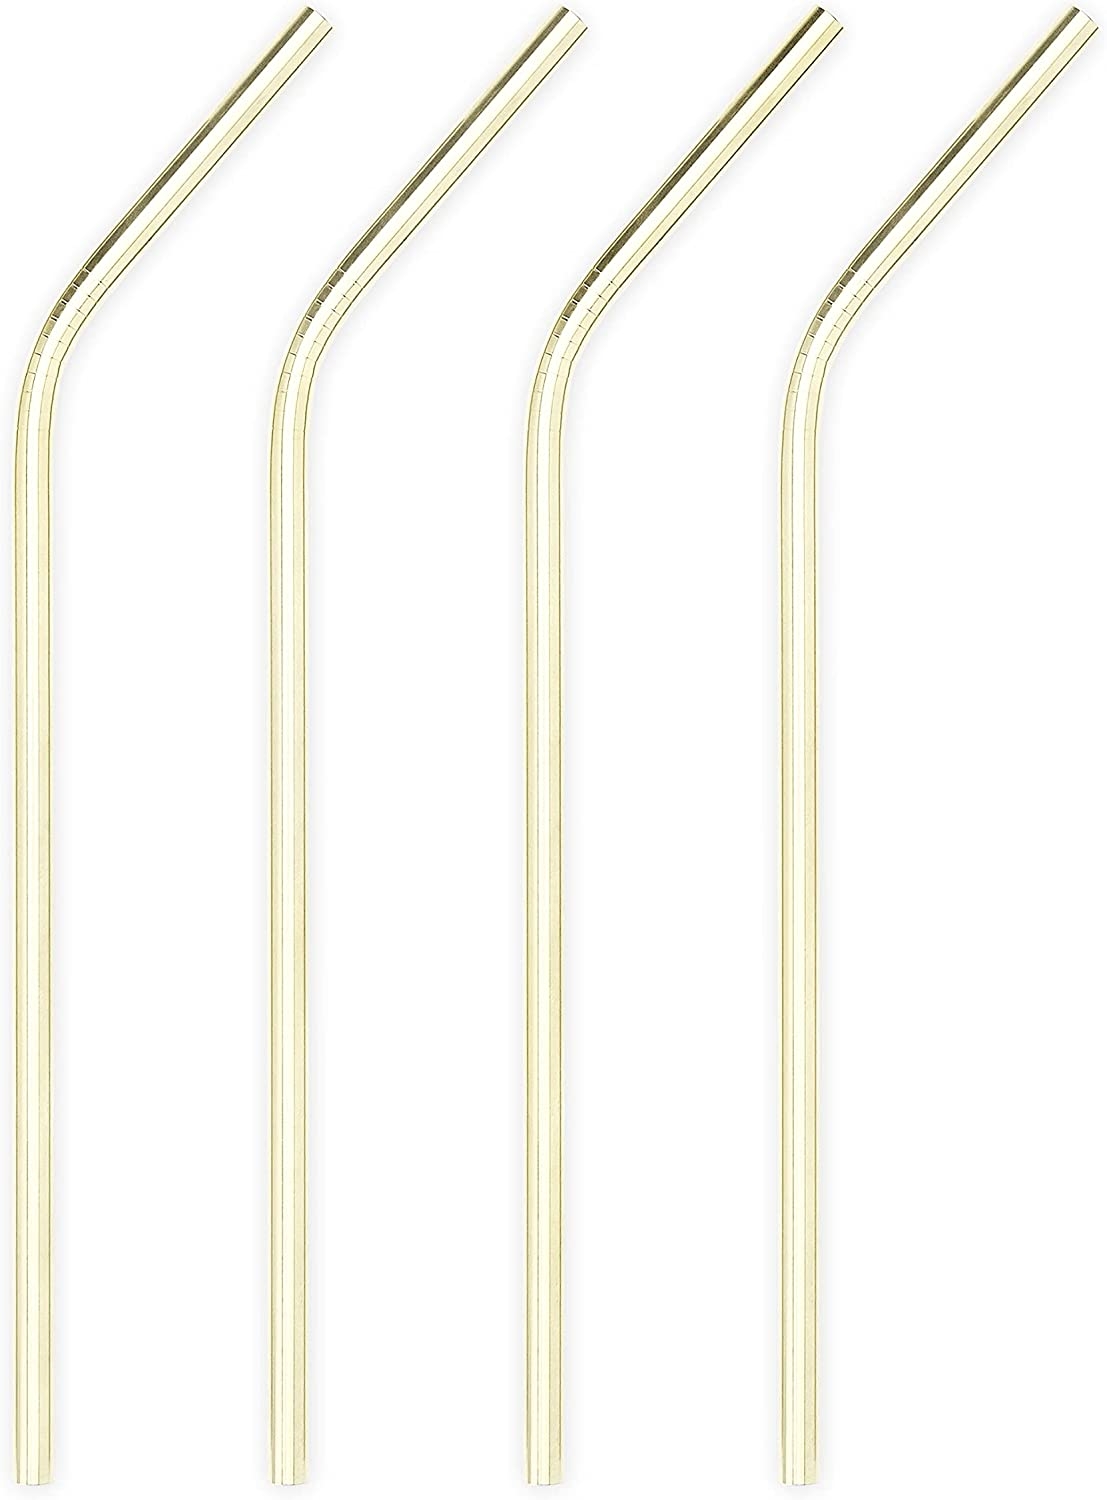 Viski Cocktail Reusable, Set of 4, Wide Straw Copper Import To Shop ×Product customization General Description Gallery Reviews